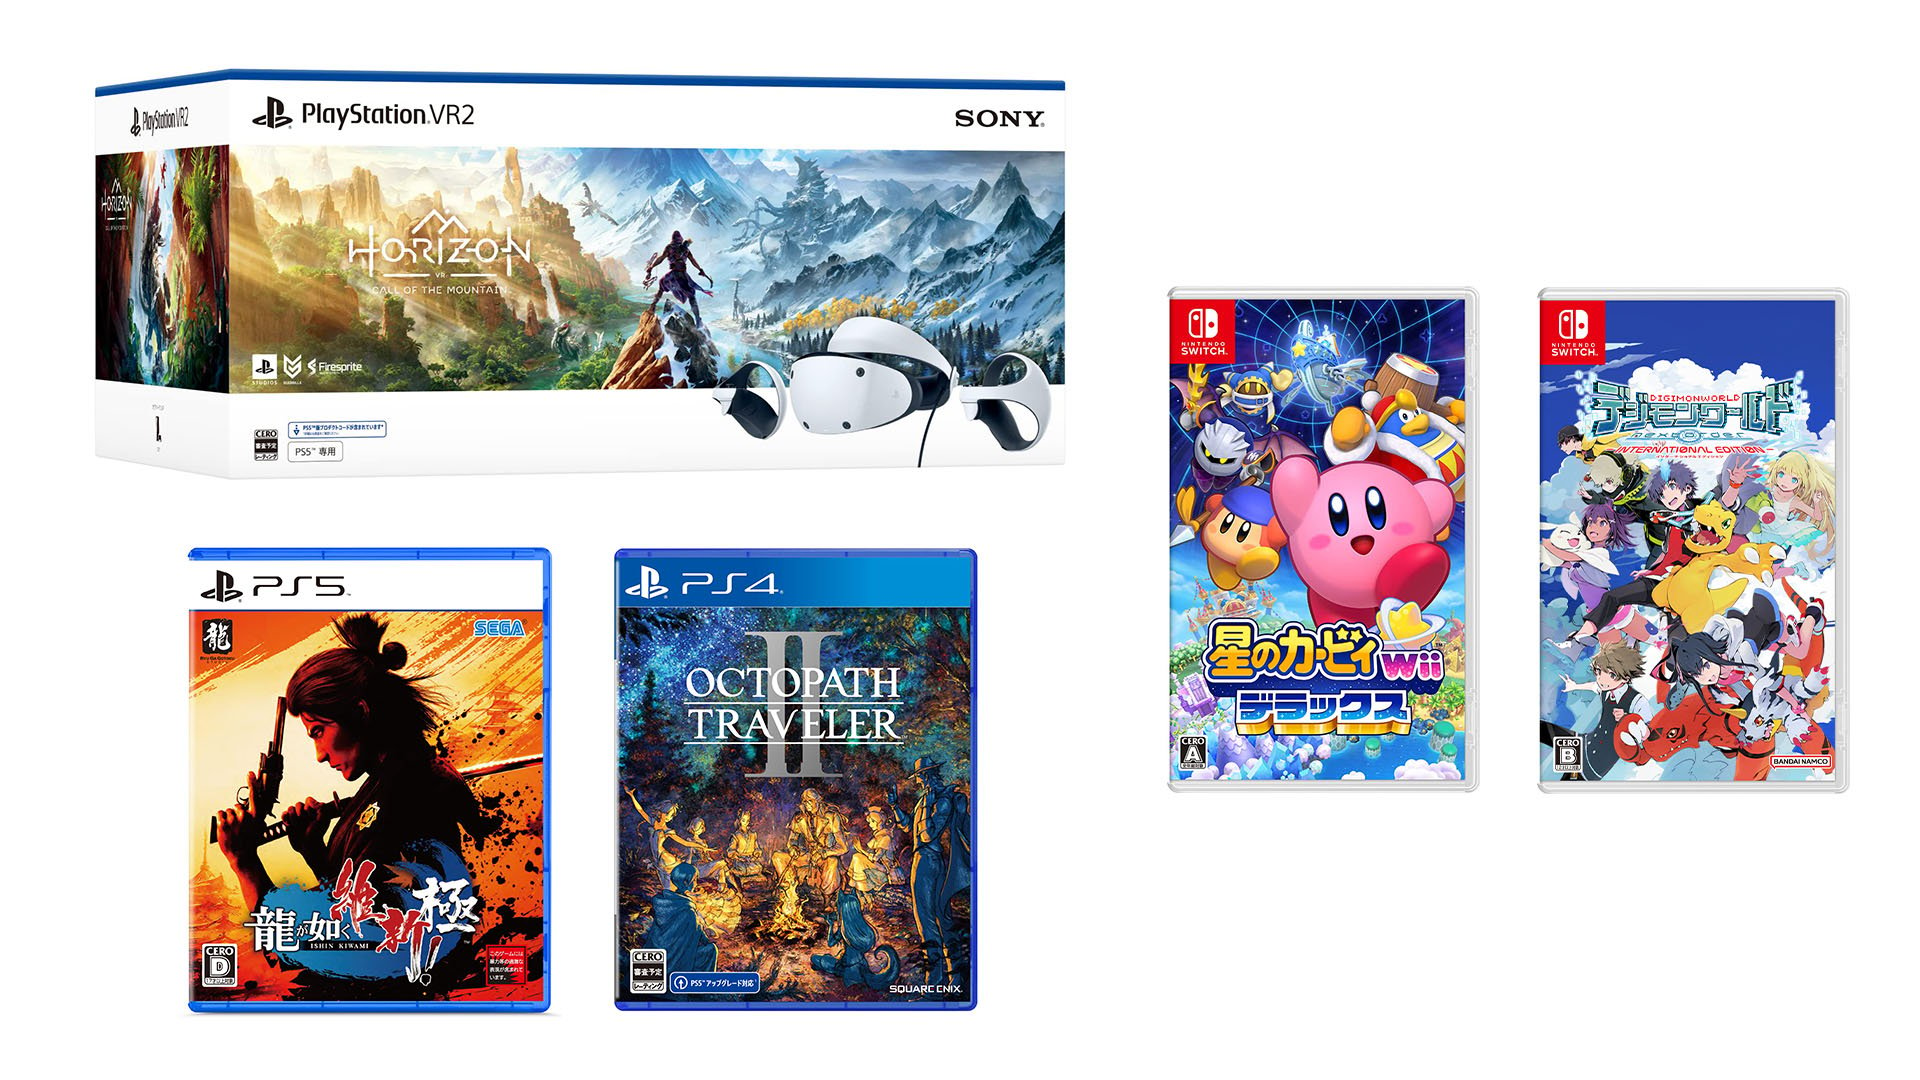 This Week’s Japanese Game Releases: PS VR2, Like a Dragon: Ishin!, Octopath Traveler II, Kirby’s Return to Dreamland Deluxe, more